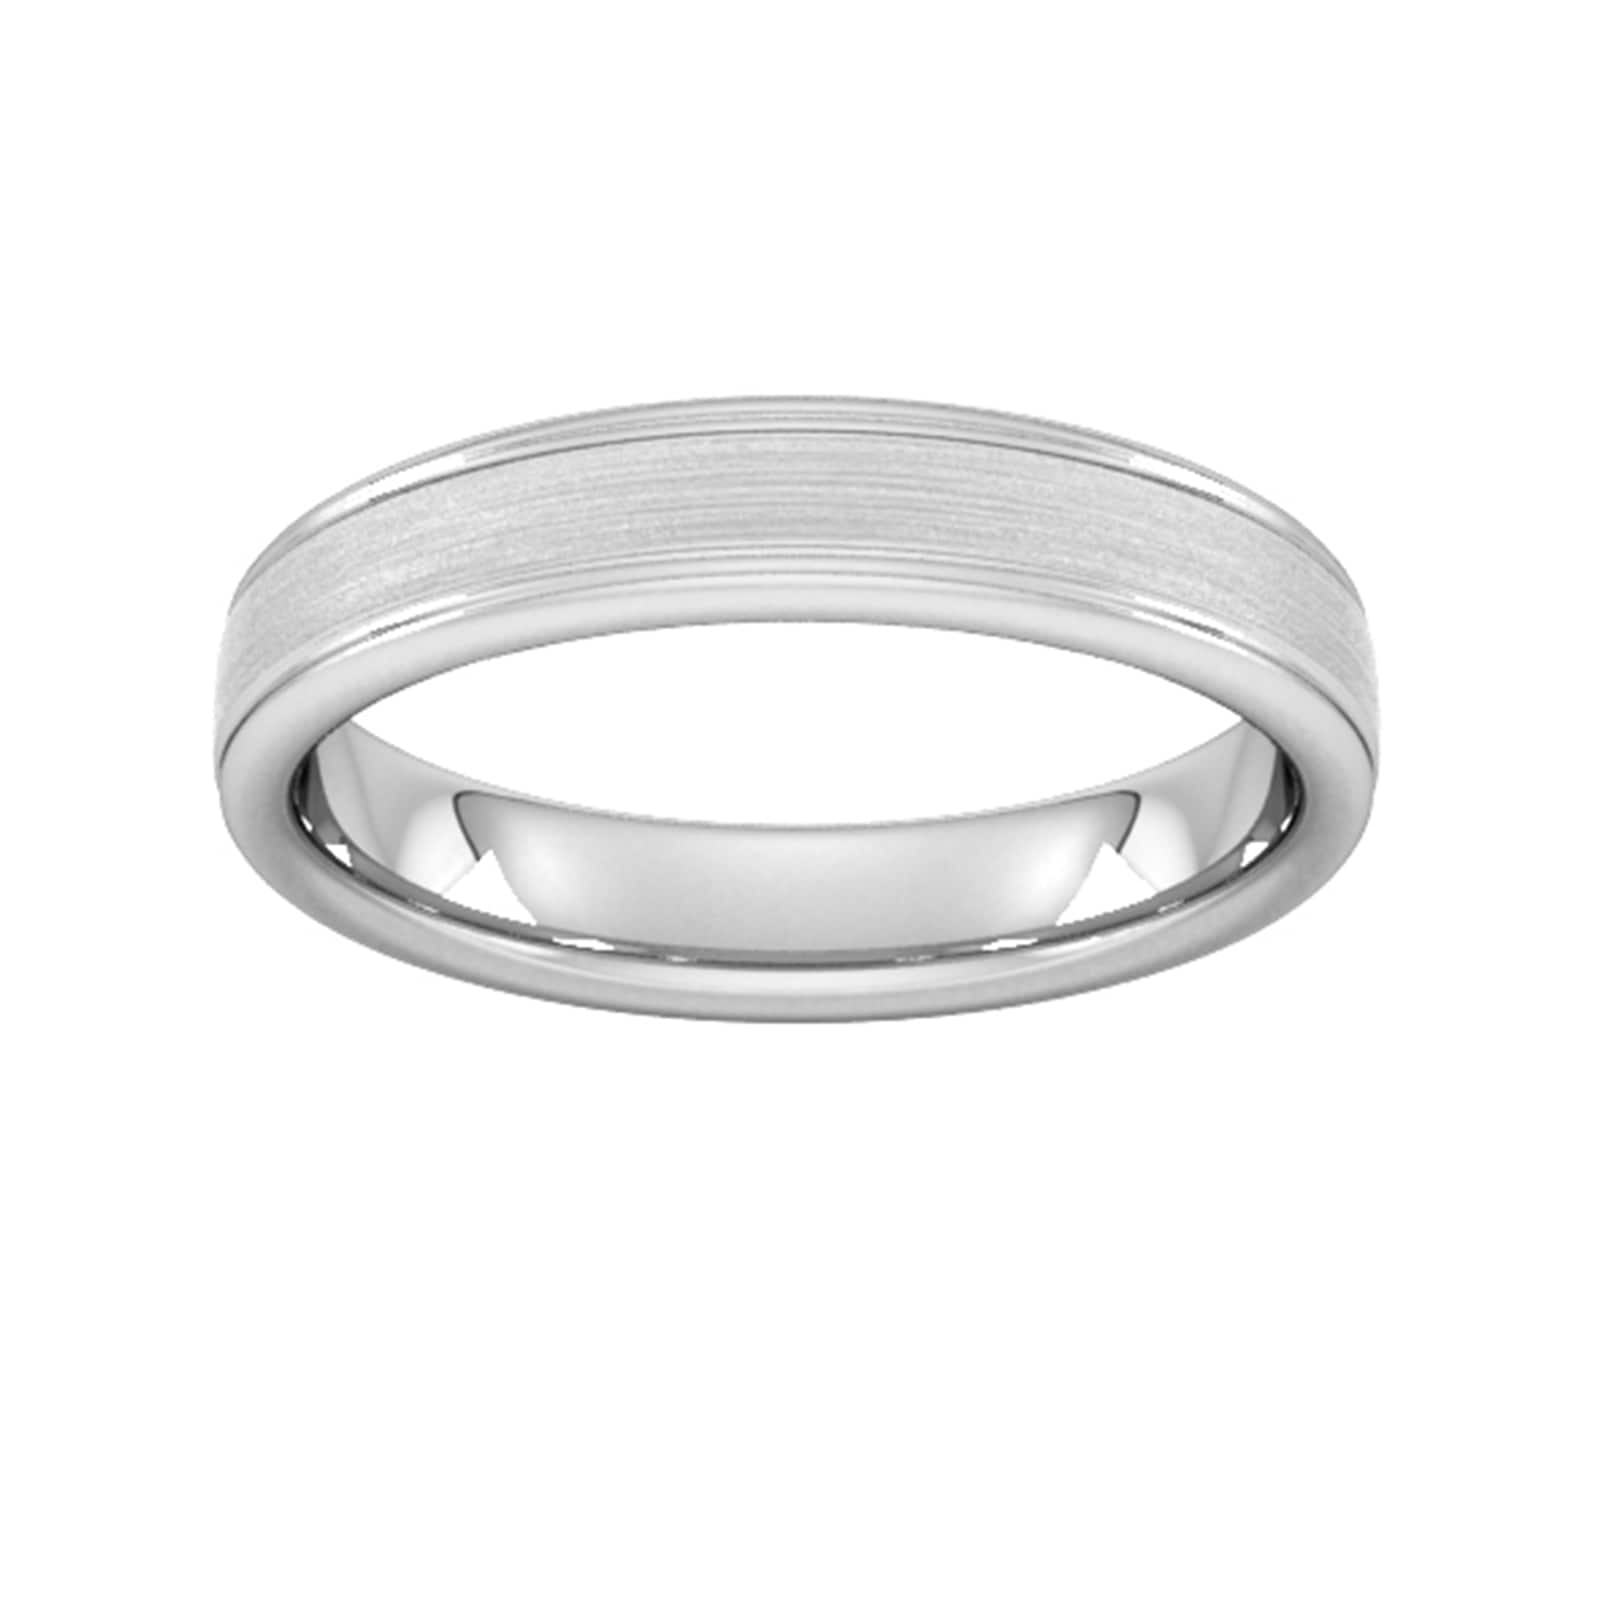 4mm D Shape Standard Matt Centre With Grooves Wedding Ring In Platinum - Ring Size N